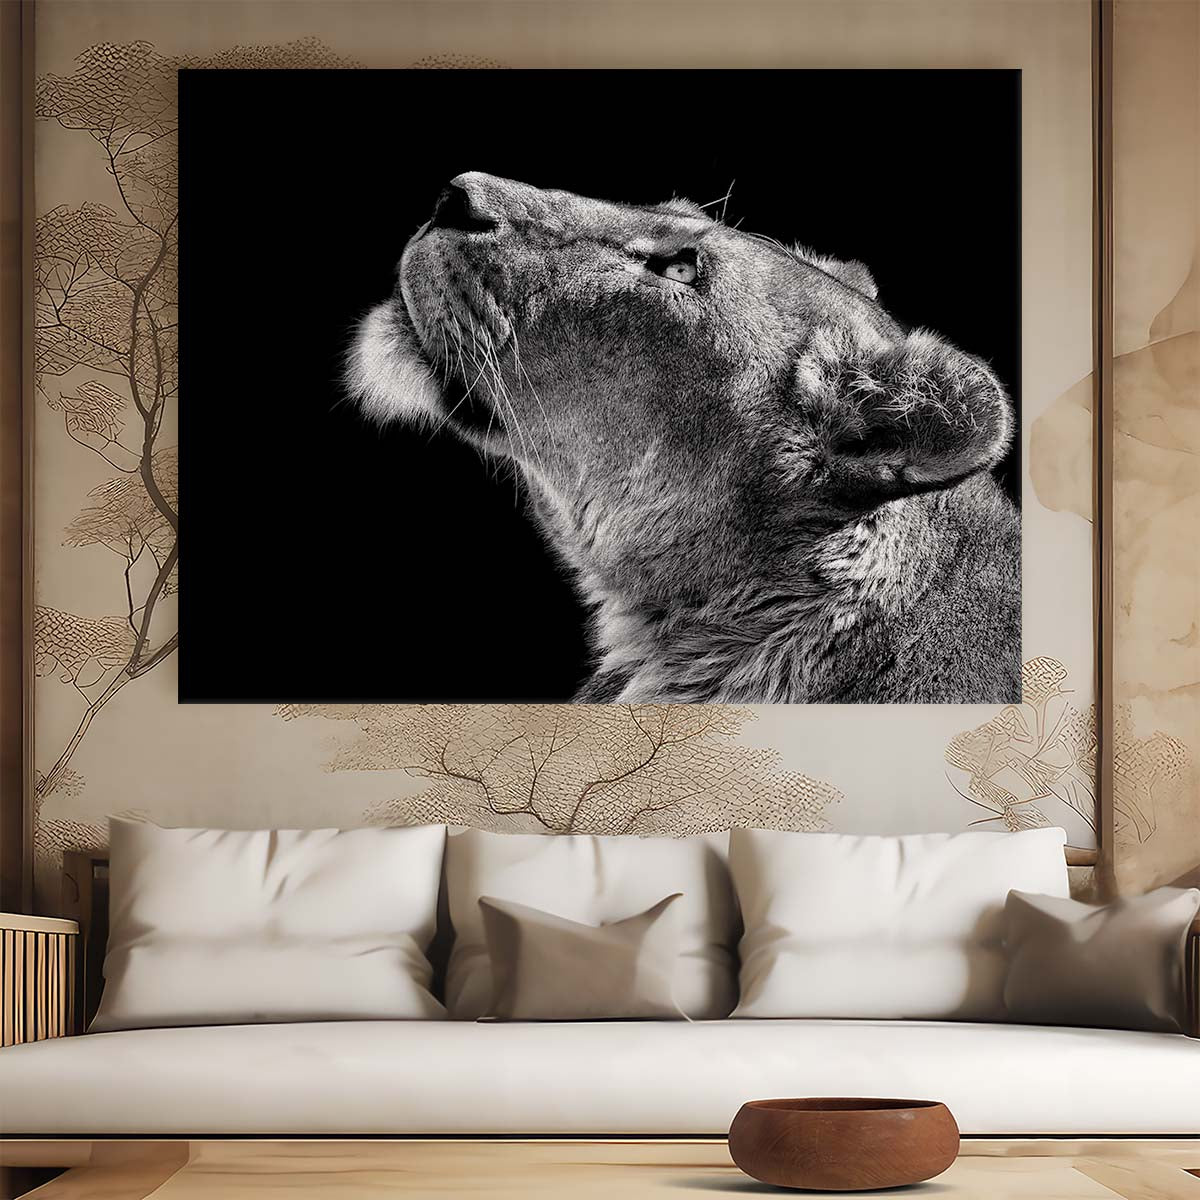 Lioness Profile in Monochrome Dark, Black and White Photography Wall Art